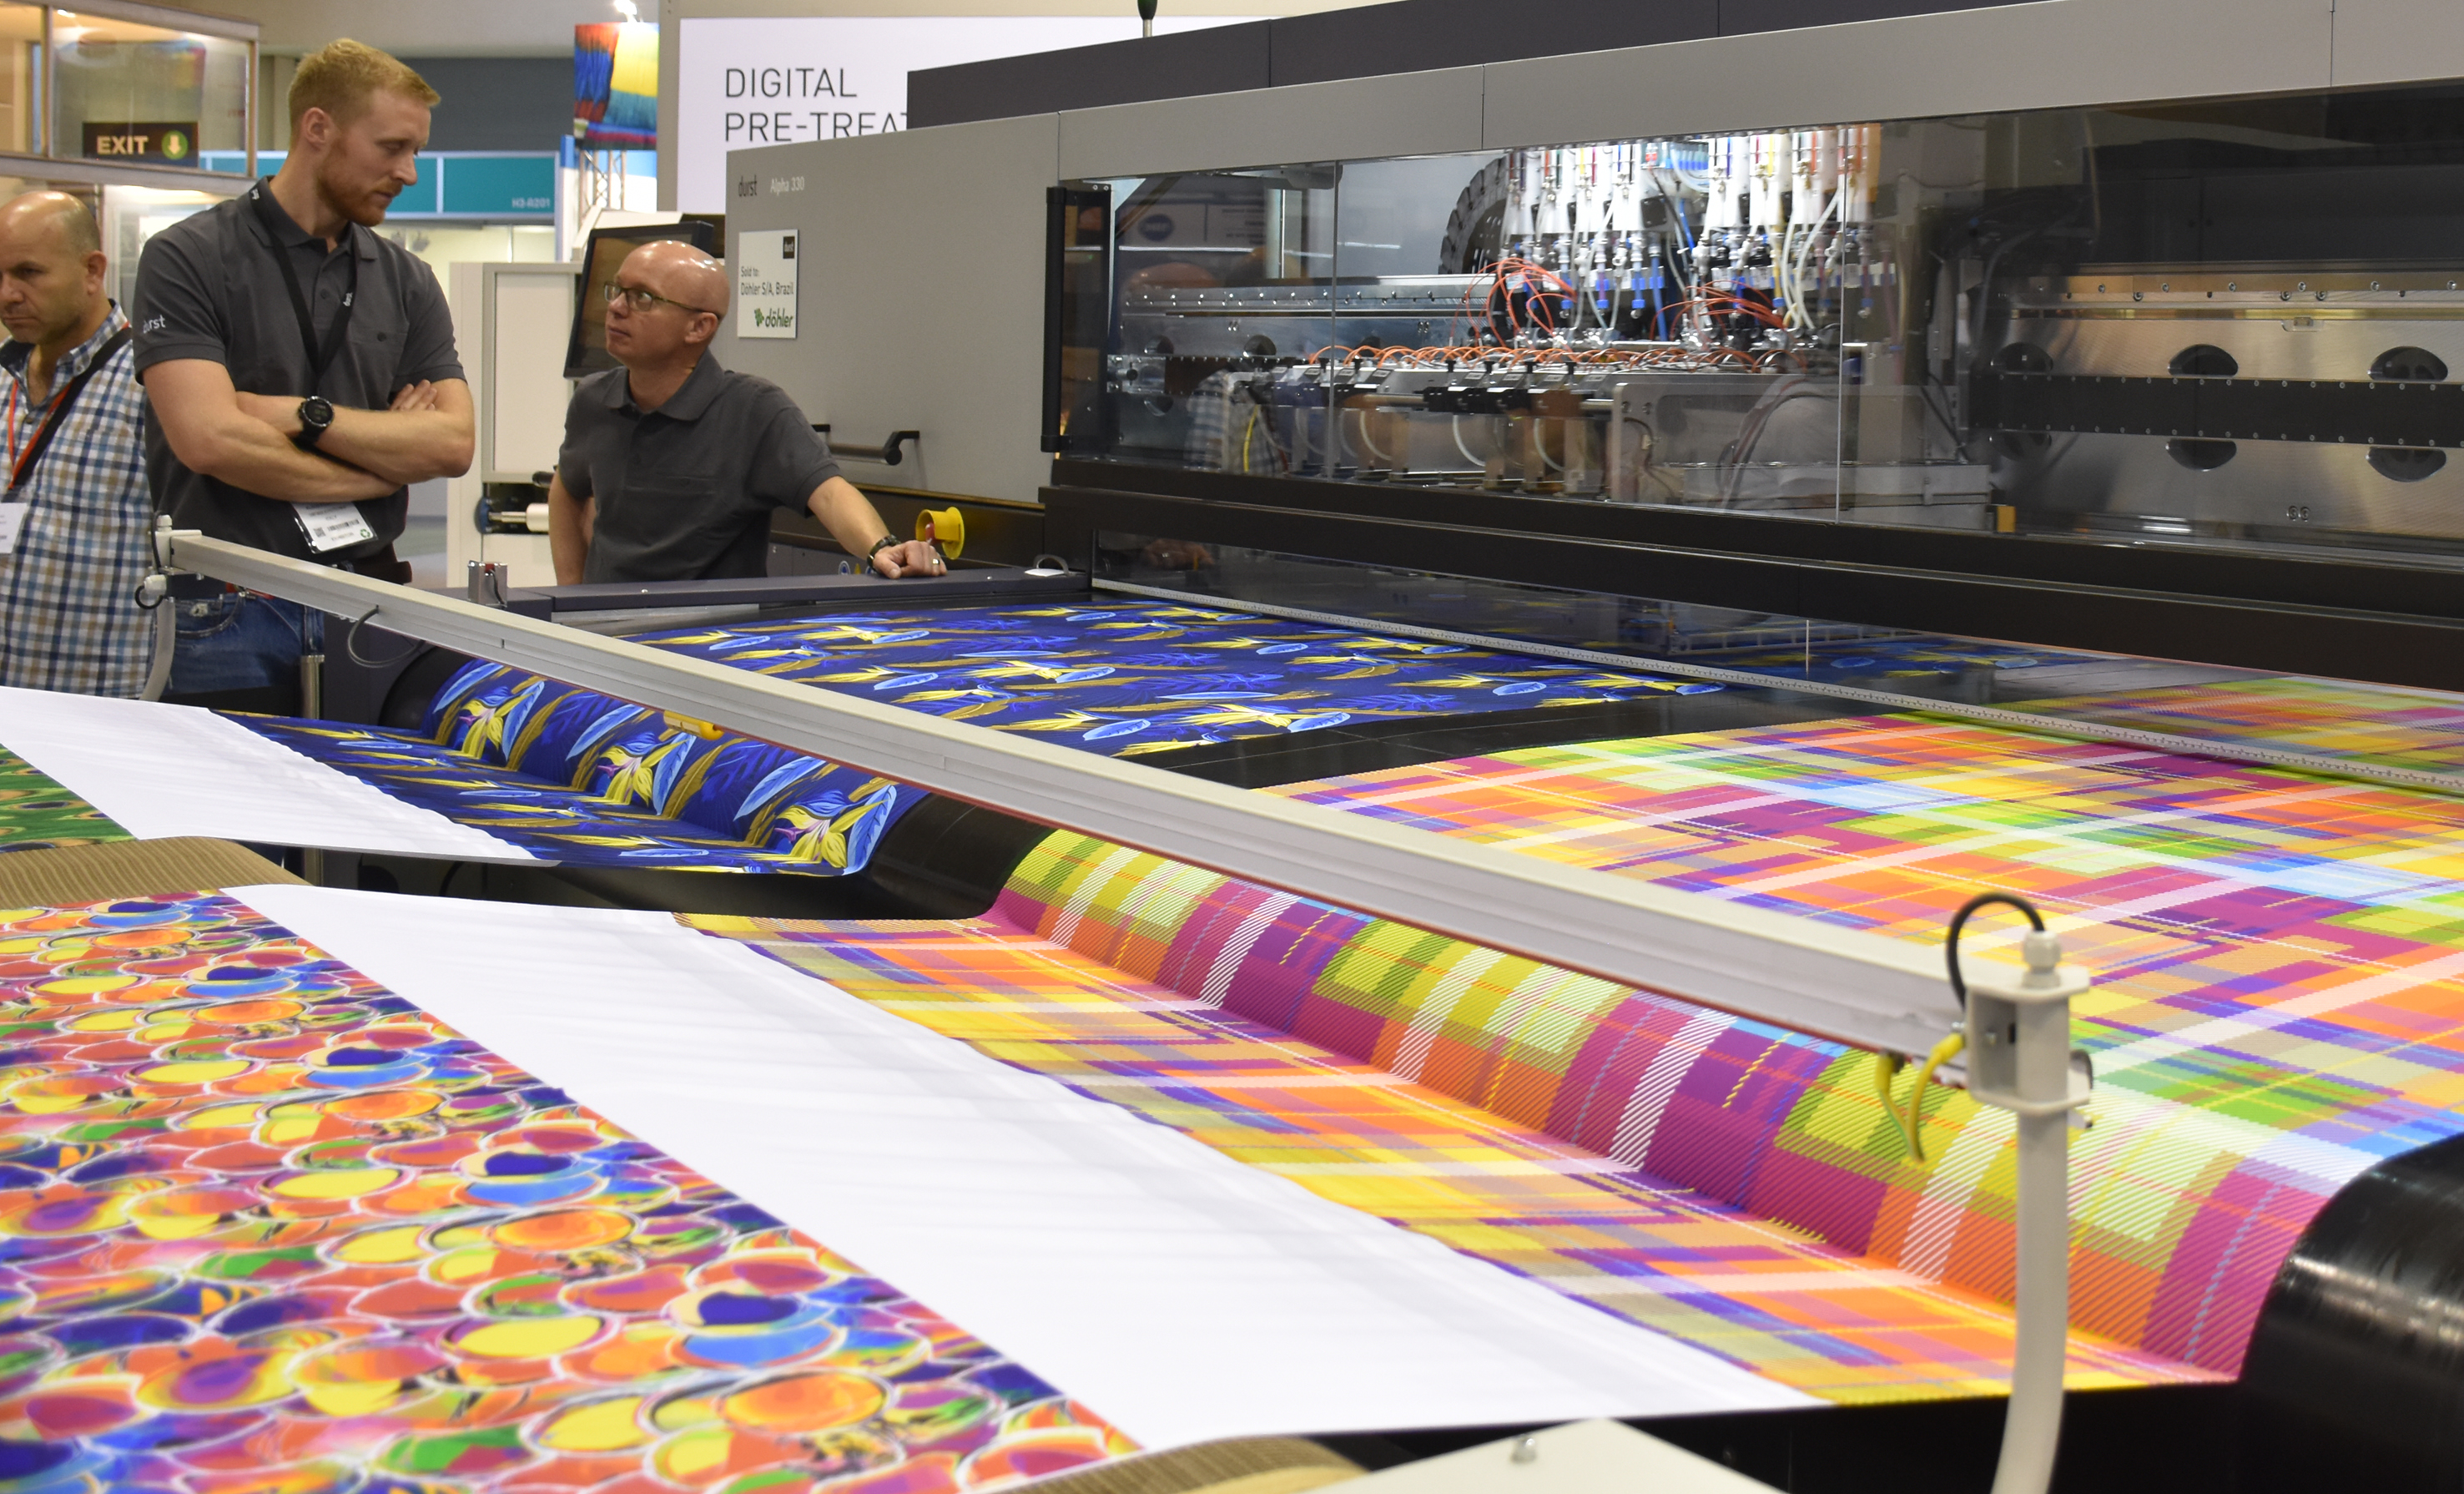 ITMA 2019 Waterless Textile Printing takes centre stage - FESPA | Screen, Digital, Textile Printing Exhibitions, Events and Associations